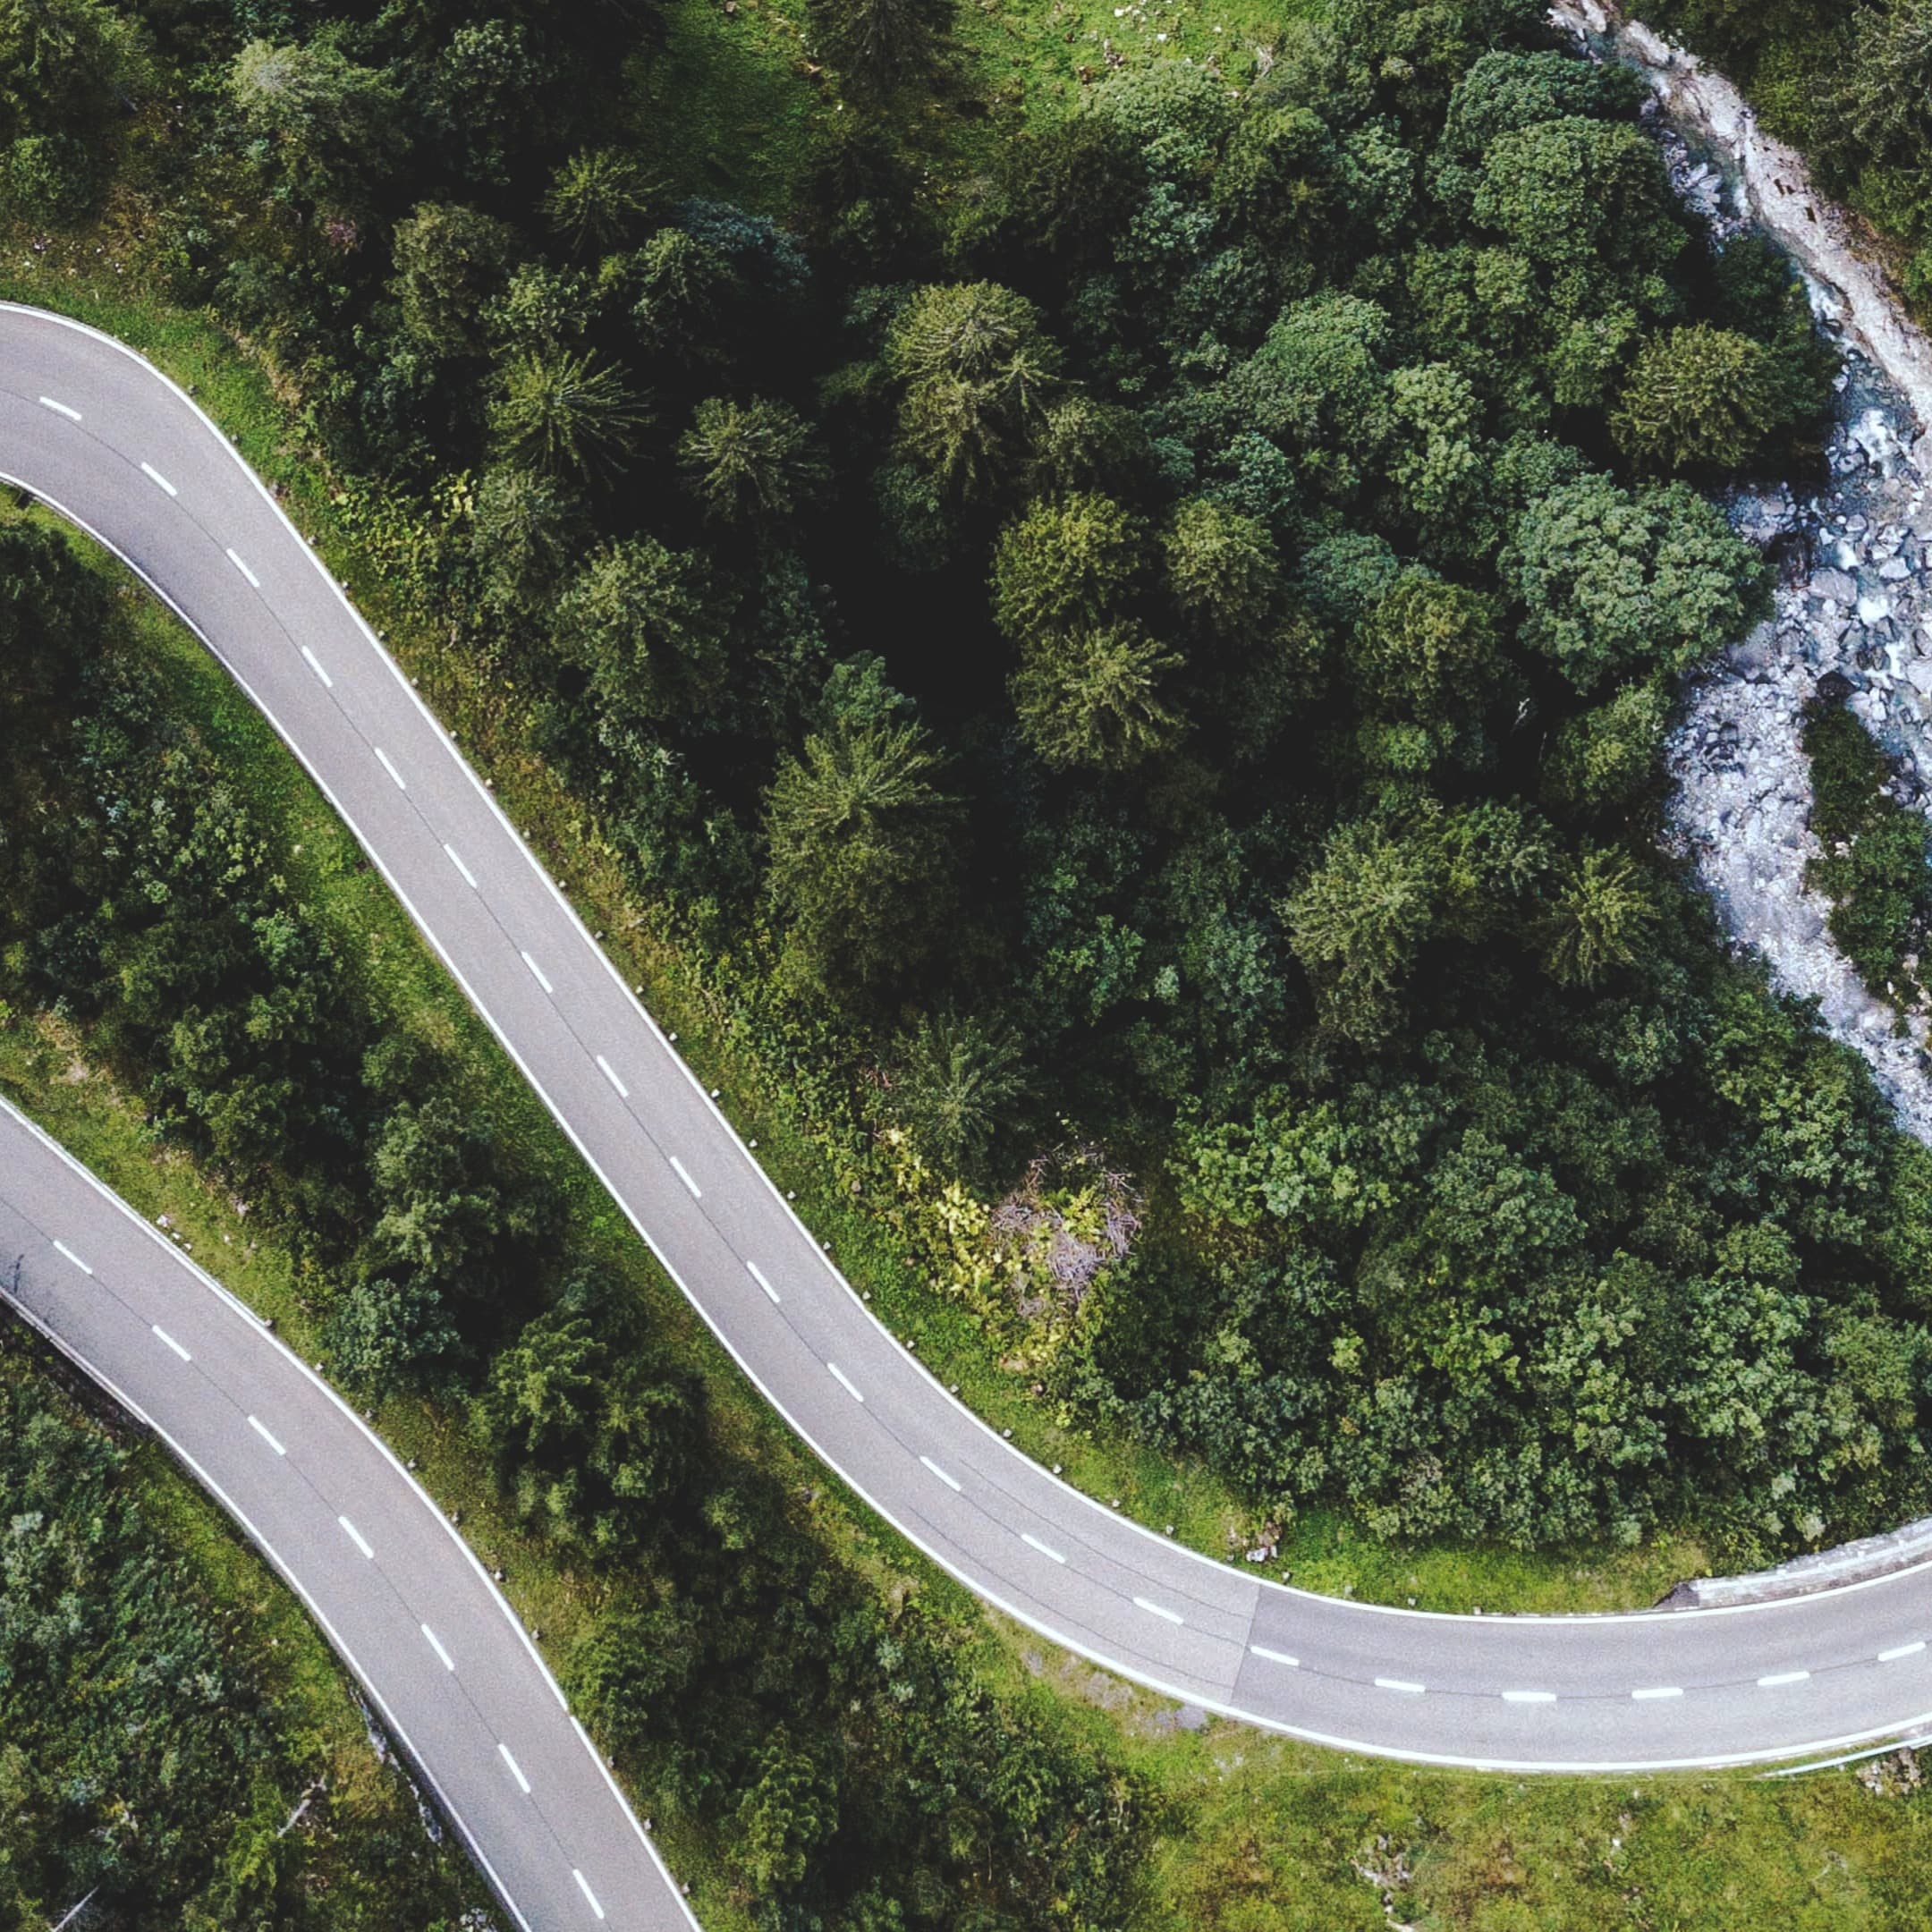 Birdview of an amazing hilly road, discover more roads like this on Road Trips by TomTom